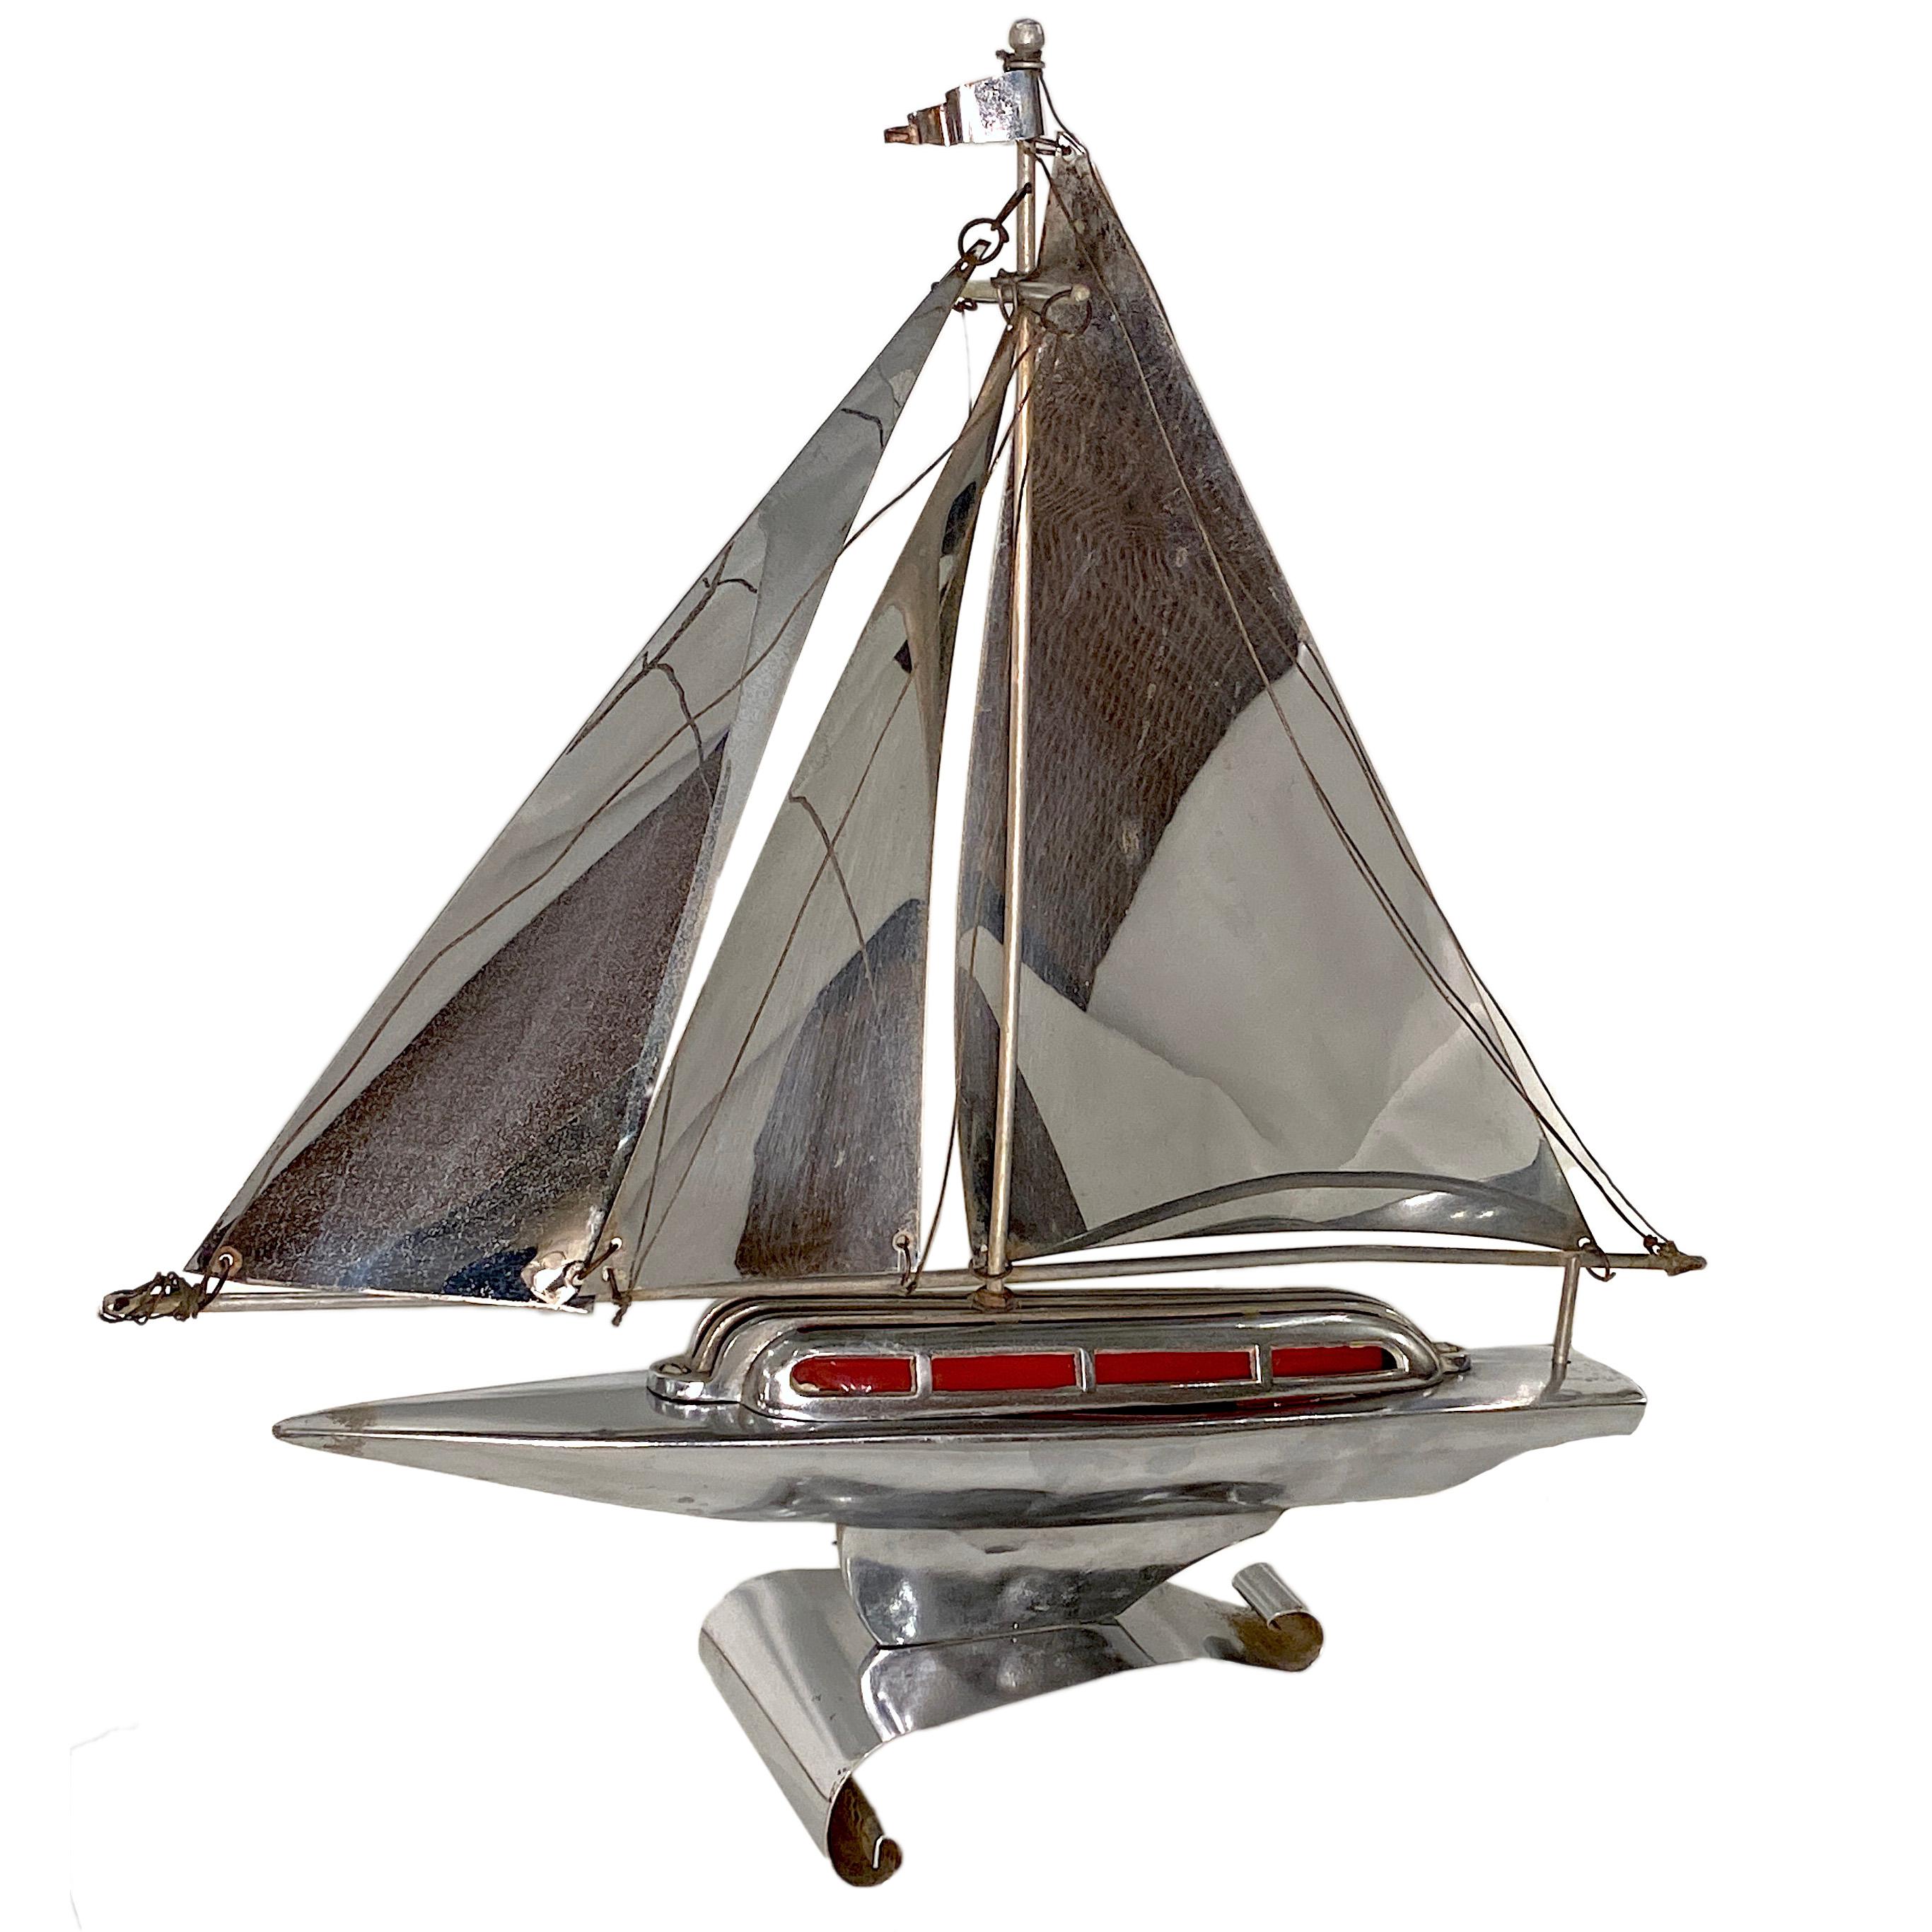 A circa 1960s English nickel-plated sailboat table lamp with an interior light.

Measurements:
Height 18